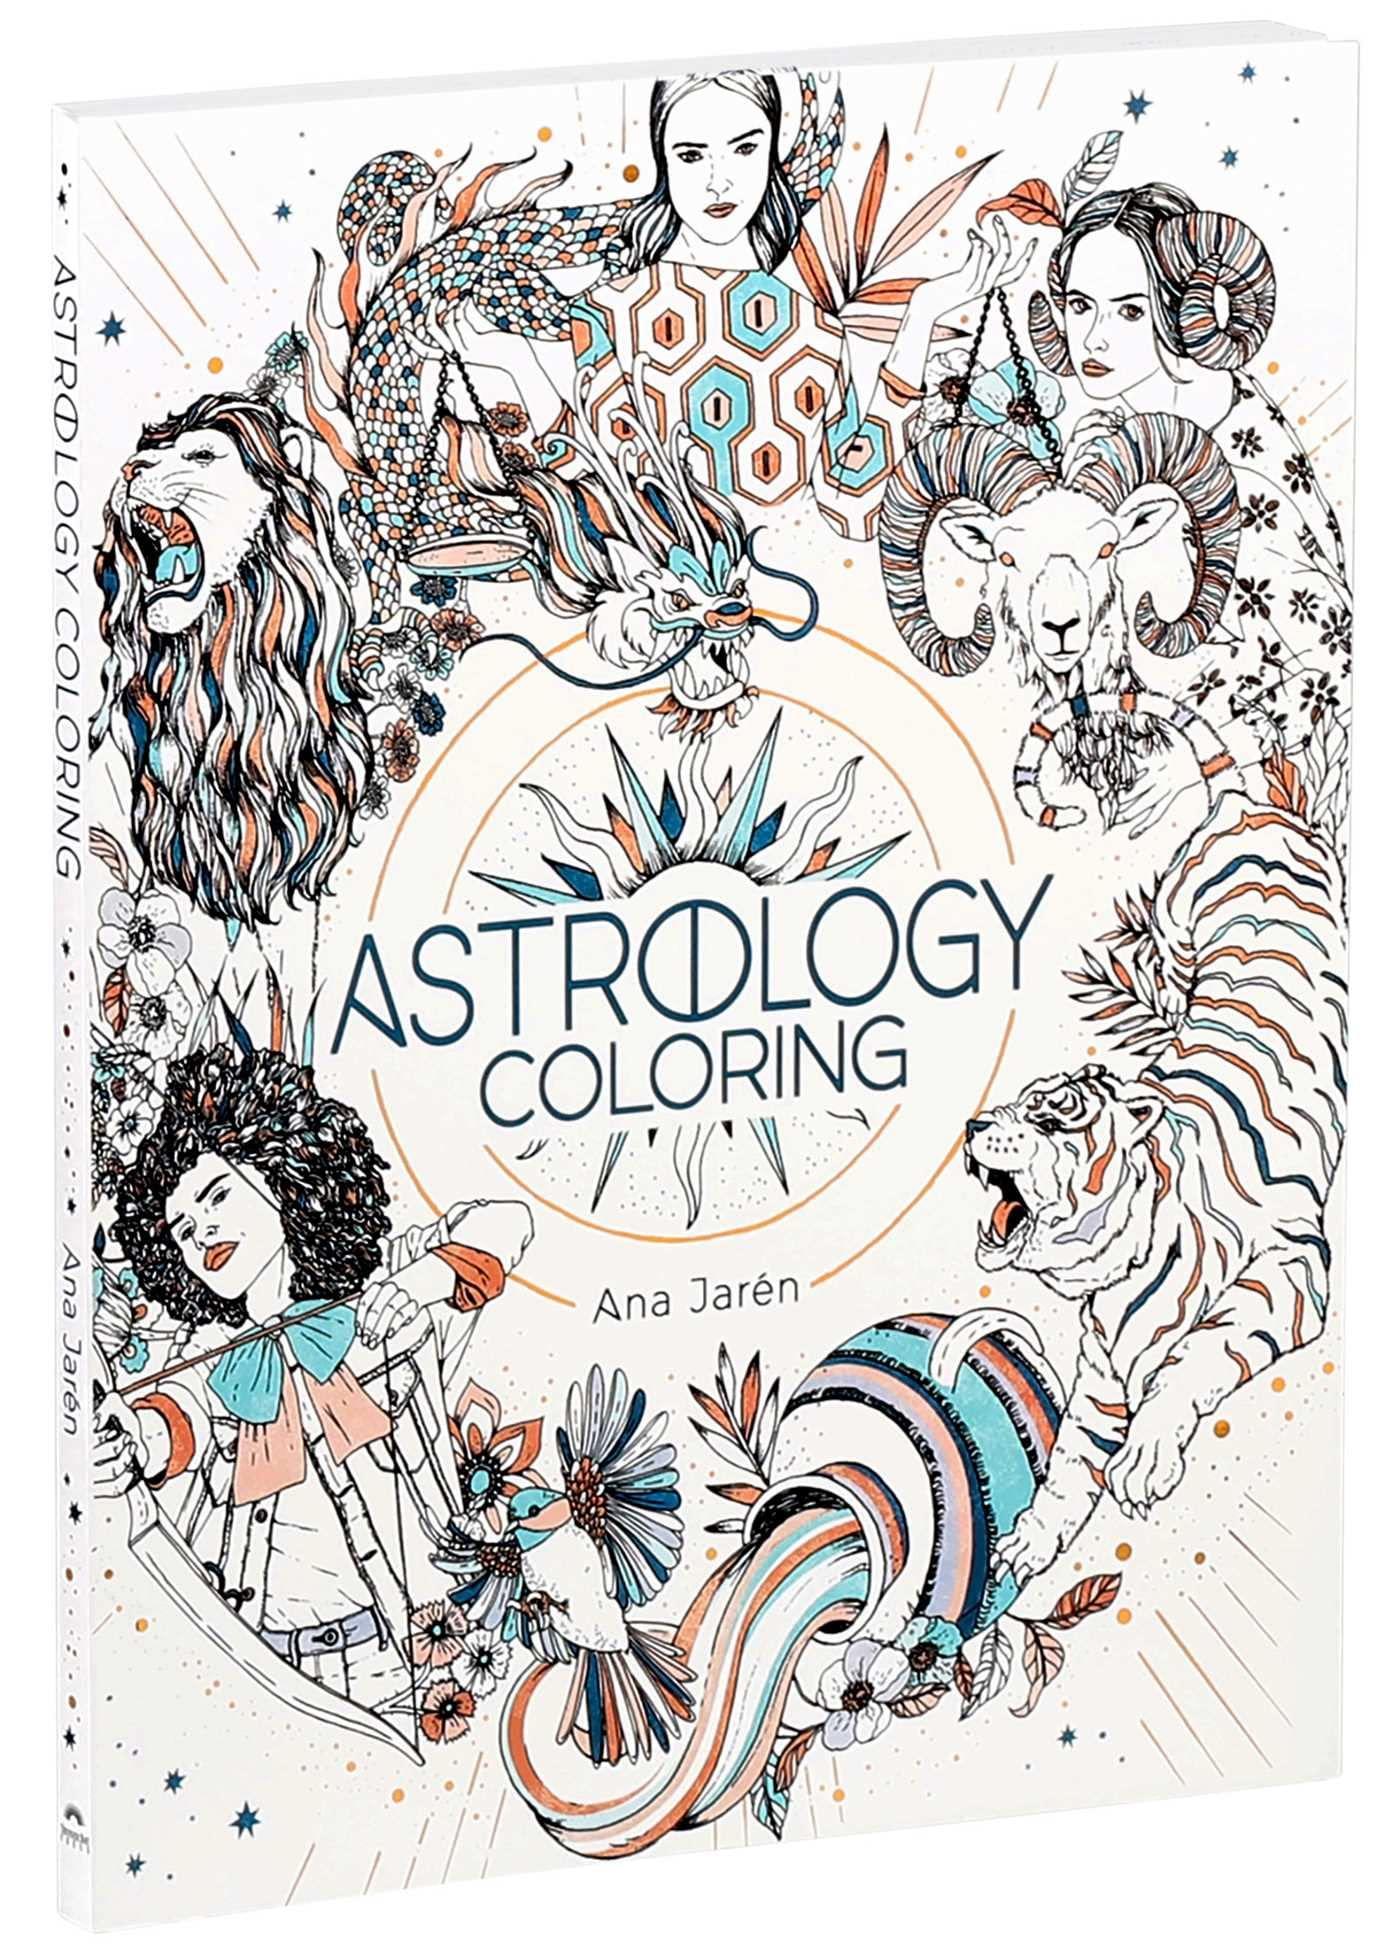 Astrology Coloring book by Ana Jarén